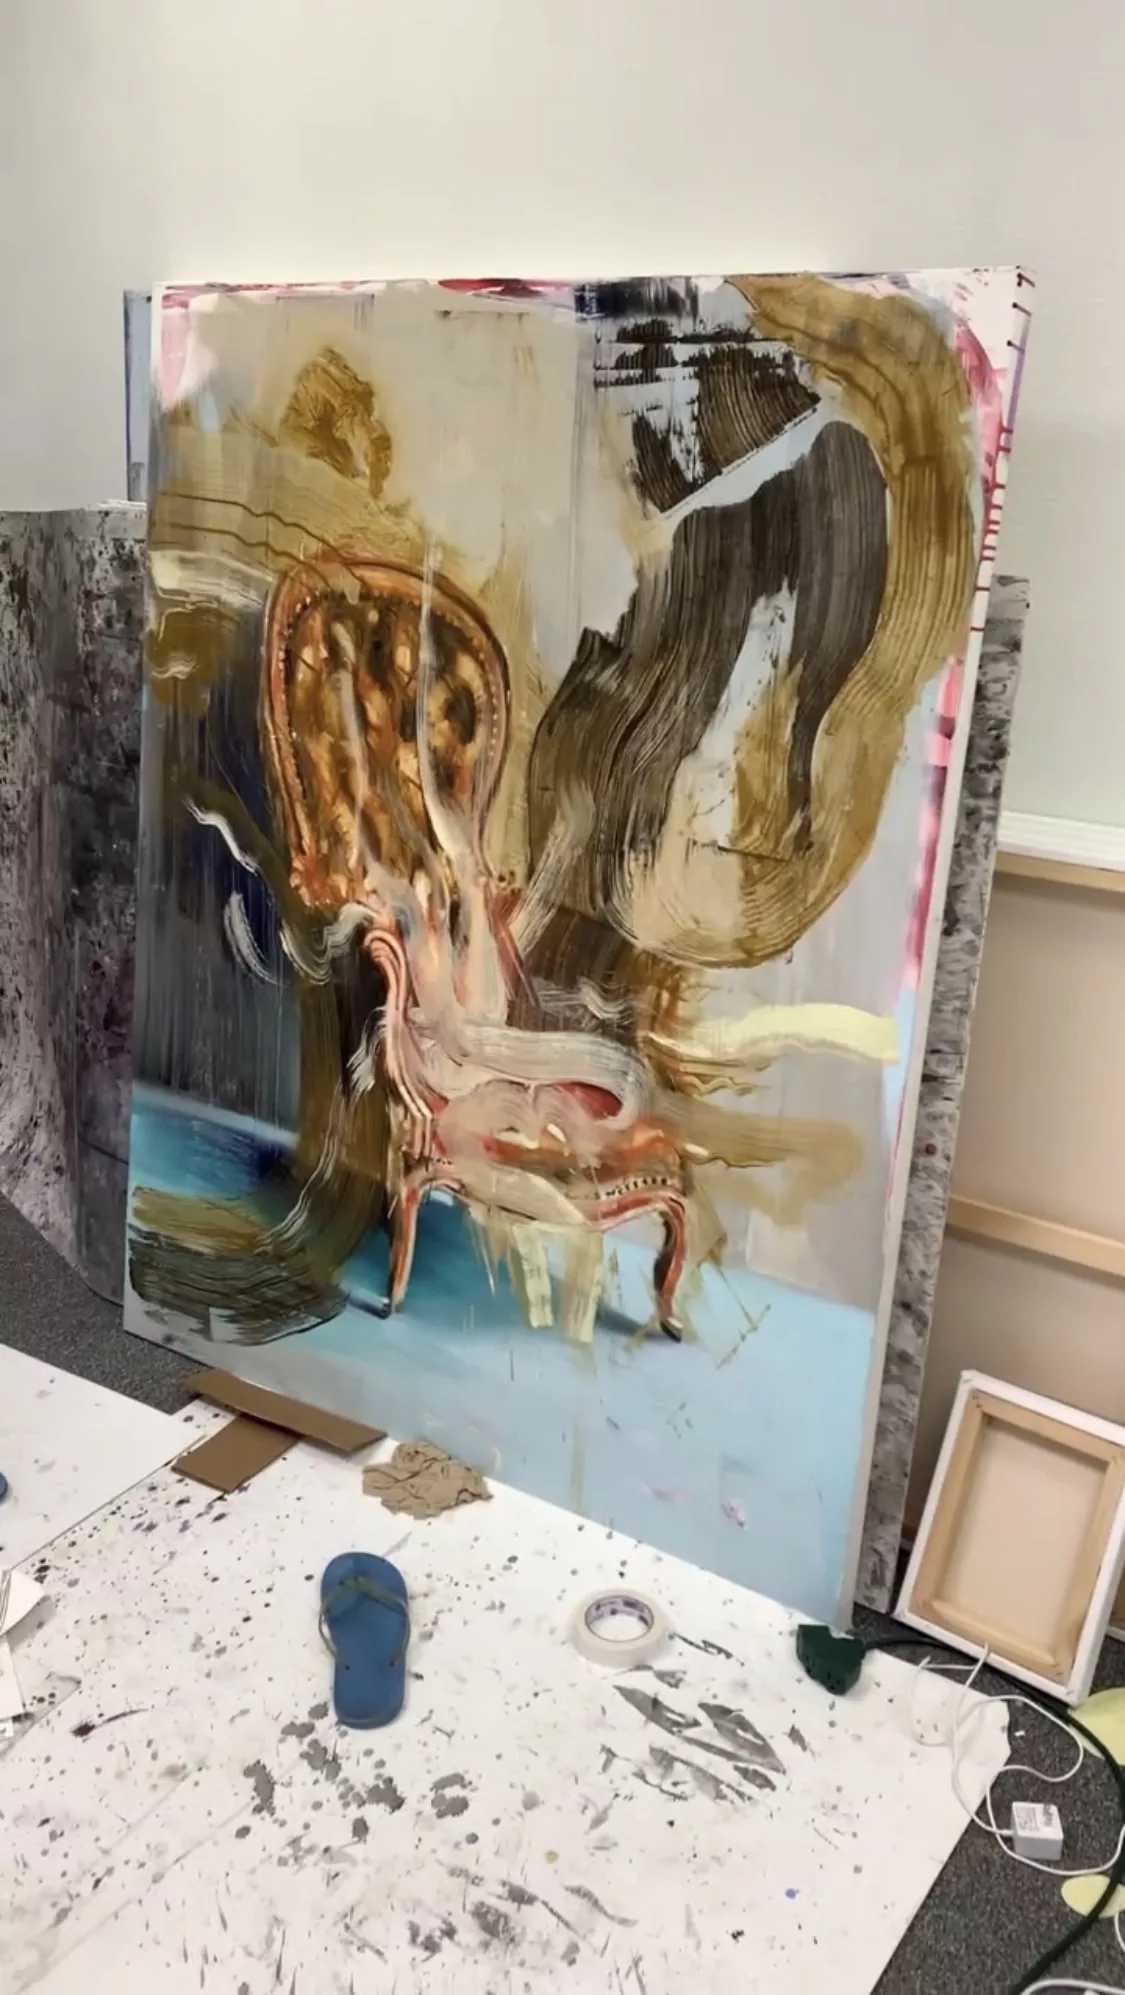 Explore My Art Studio Through These Behind-The-Scenes Images 2